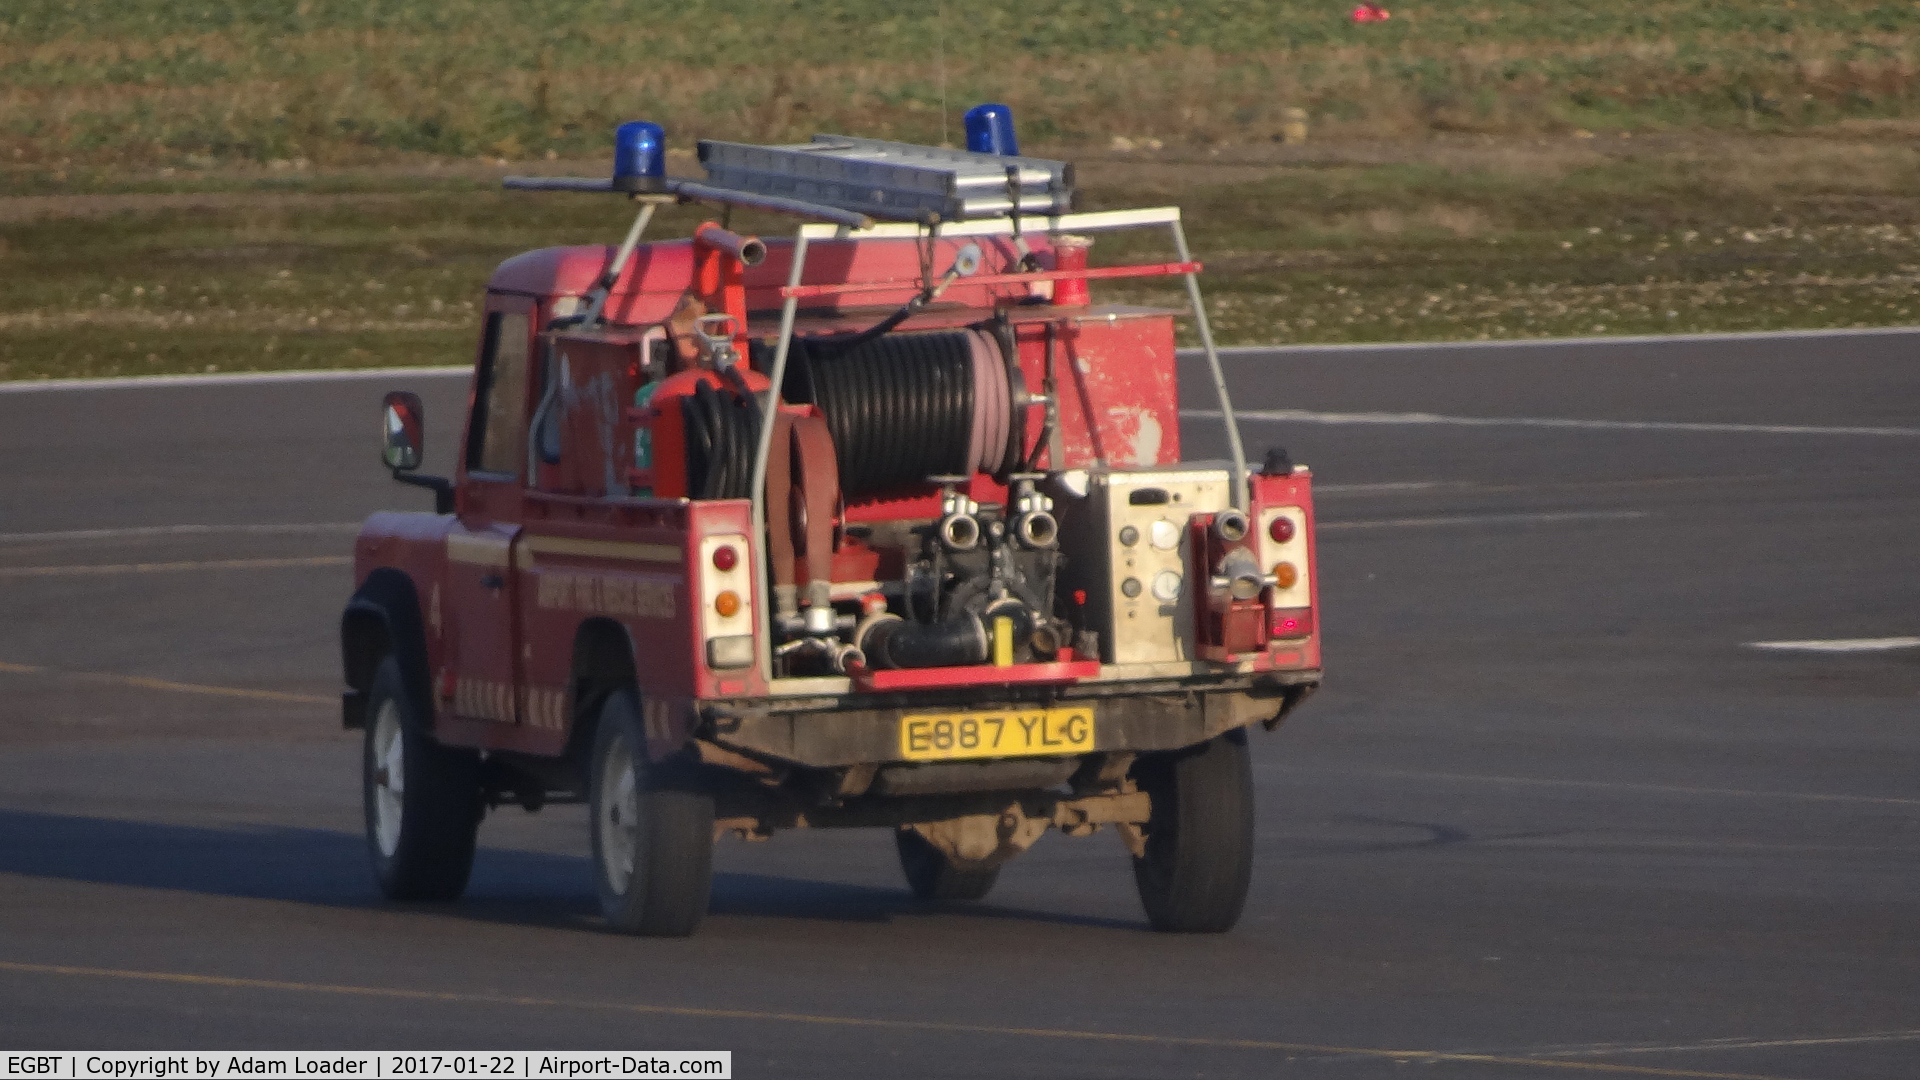 Turweston Aerodrome Airport, Turweston, England United Kingdom (EGBT) - Fire Land Rover going to pick up some FOD from next to the runway